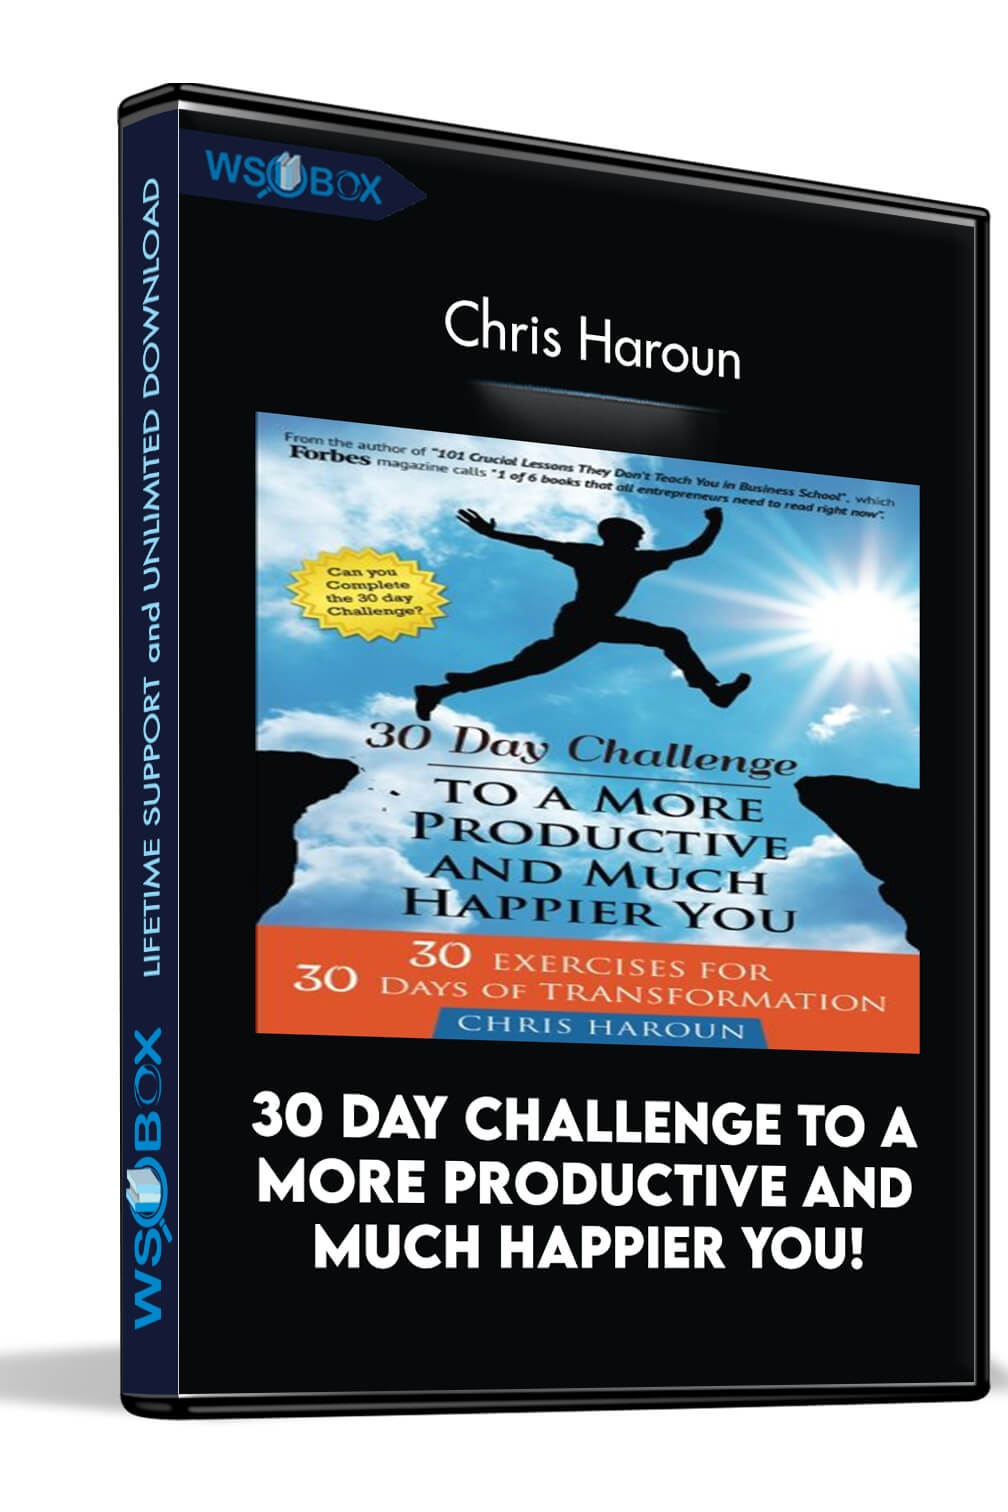 30 Day Challenge to a More Productive and Much Happier You! – Chris Haroun